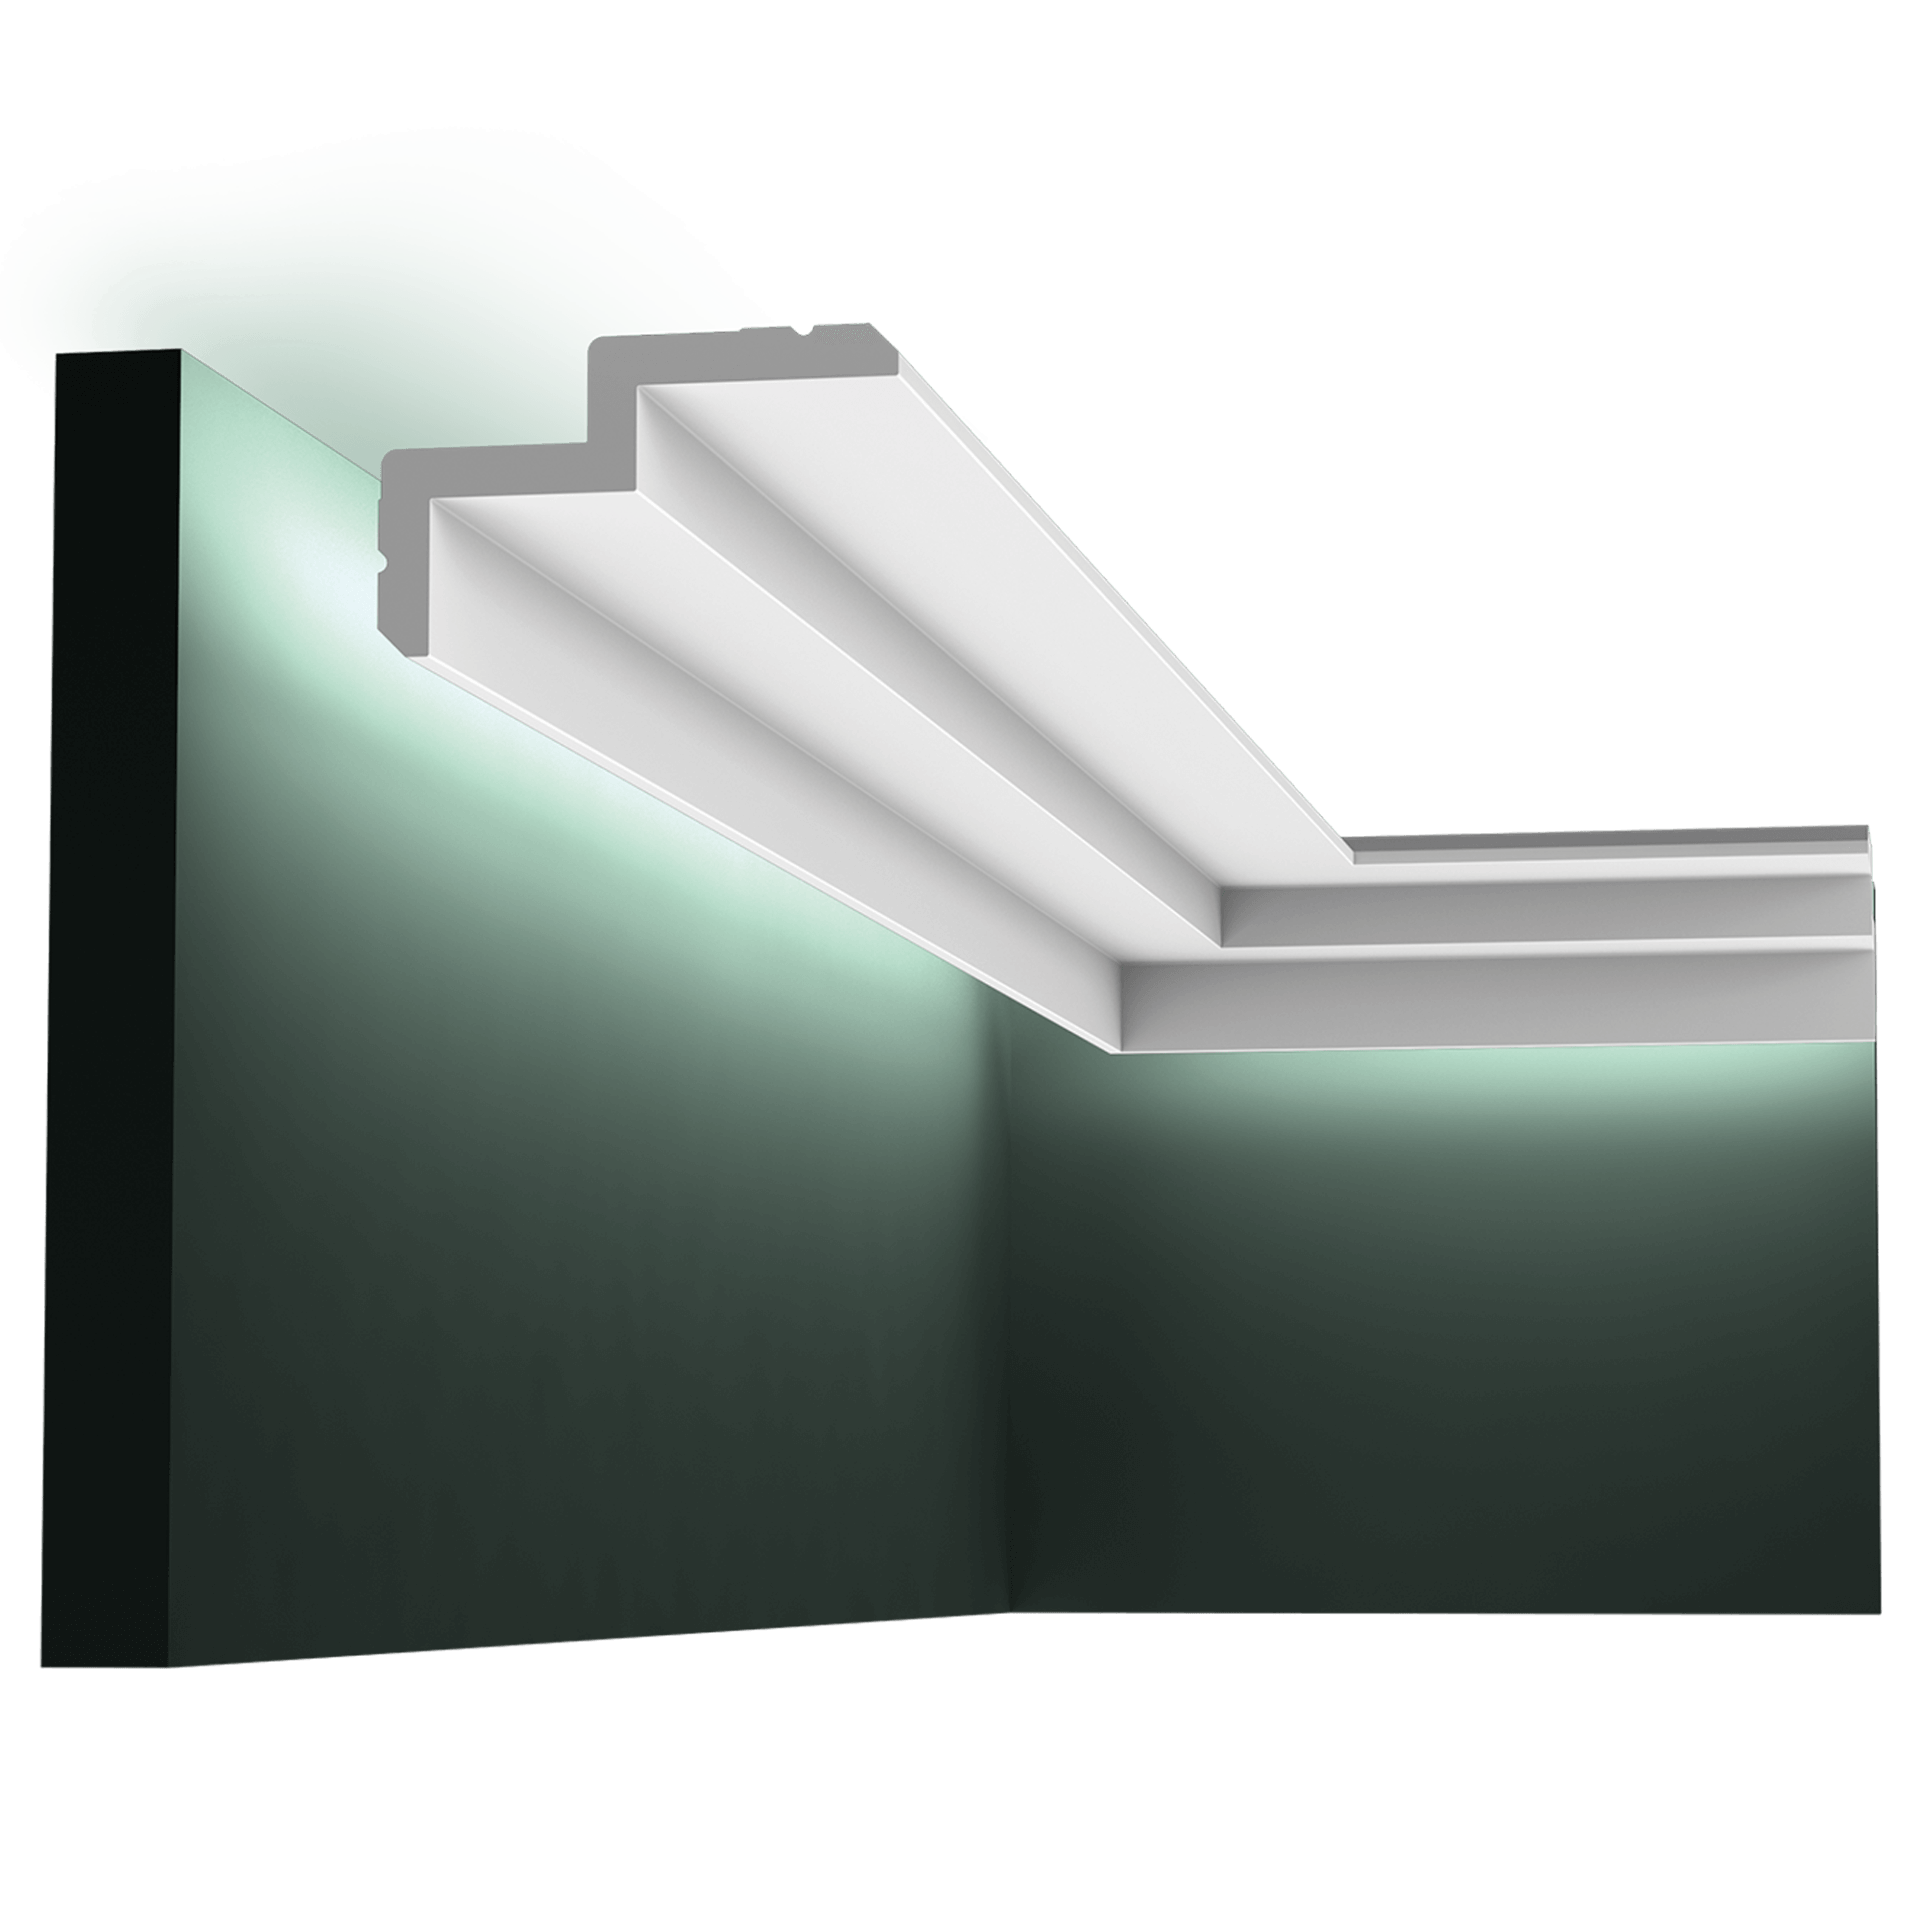 c390 downlighter 0e7c This clean, modern profile from the Steps range can also be used to conceal LED lighting. The angled corners above and below provide additional subtle shadow lines. Designed by Orio Tonini.